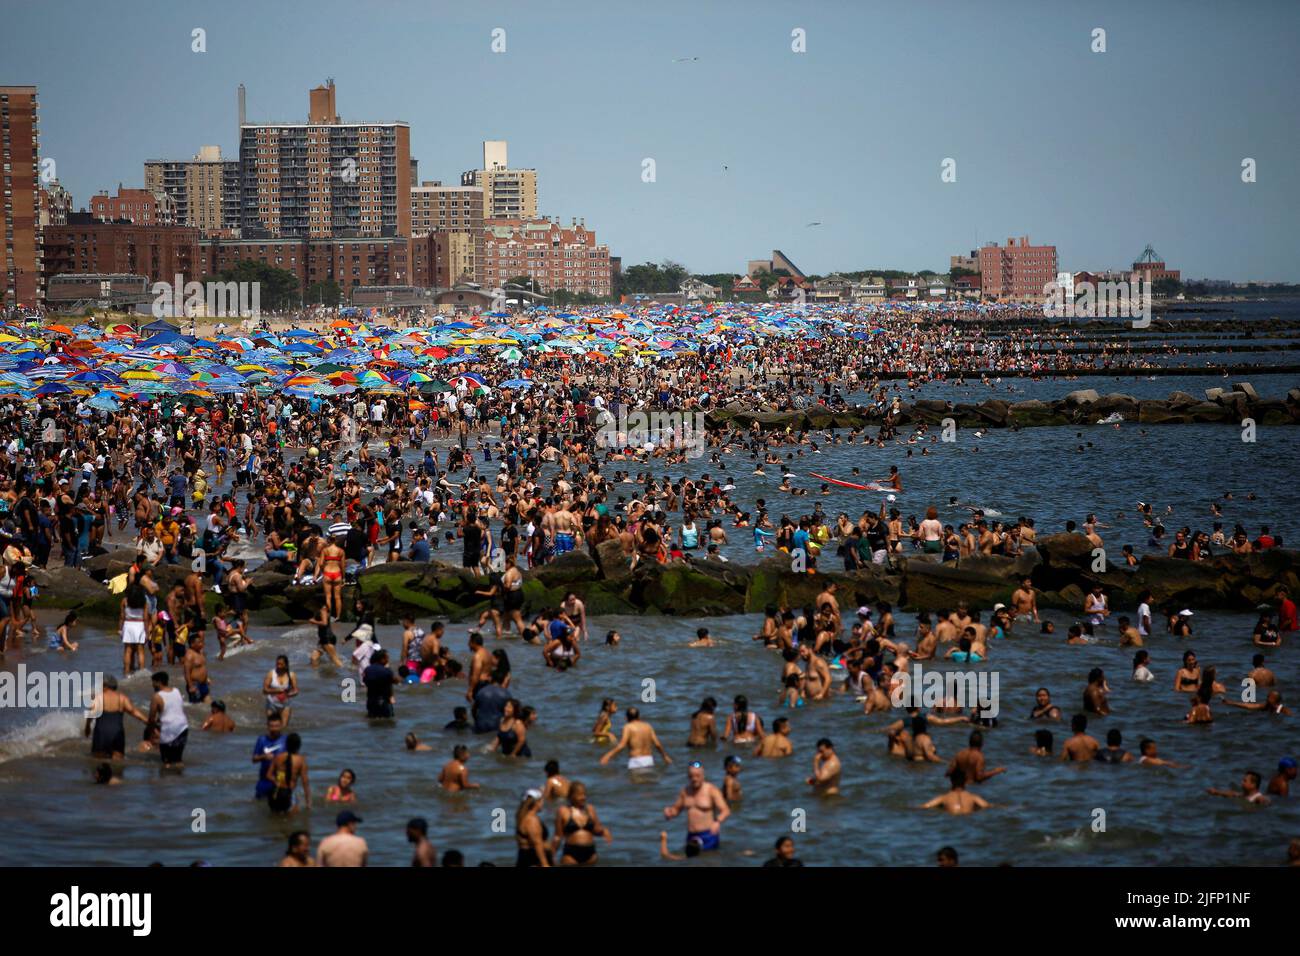 People celebrate 4th of July on an overcrowded beach at Coney Island in New York, U.S., July 4, 2022. REUTERS/Eduardo Munoz Stock Photo